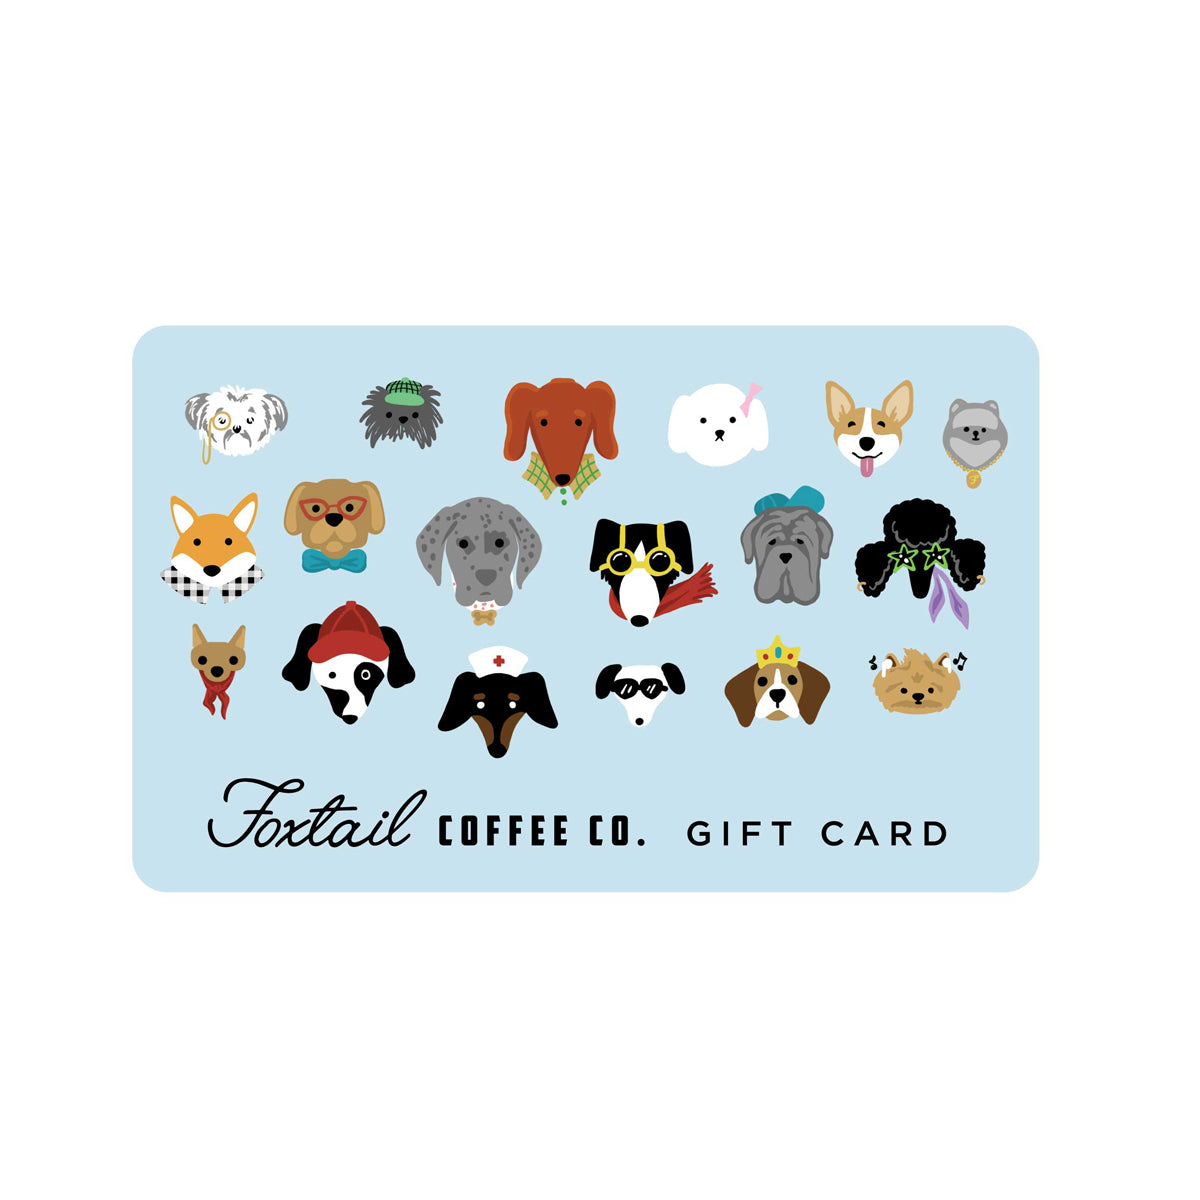 Foxtail Coffee Gift Card - Puppies Costume